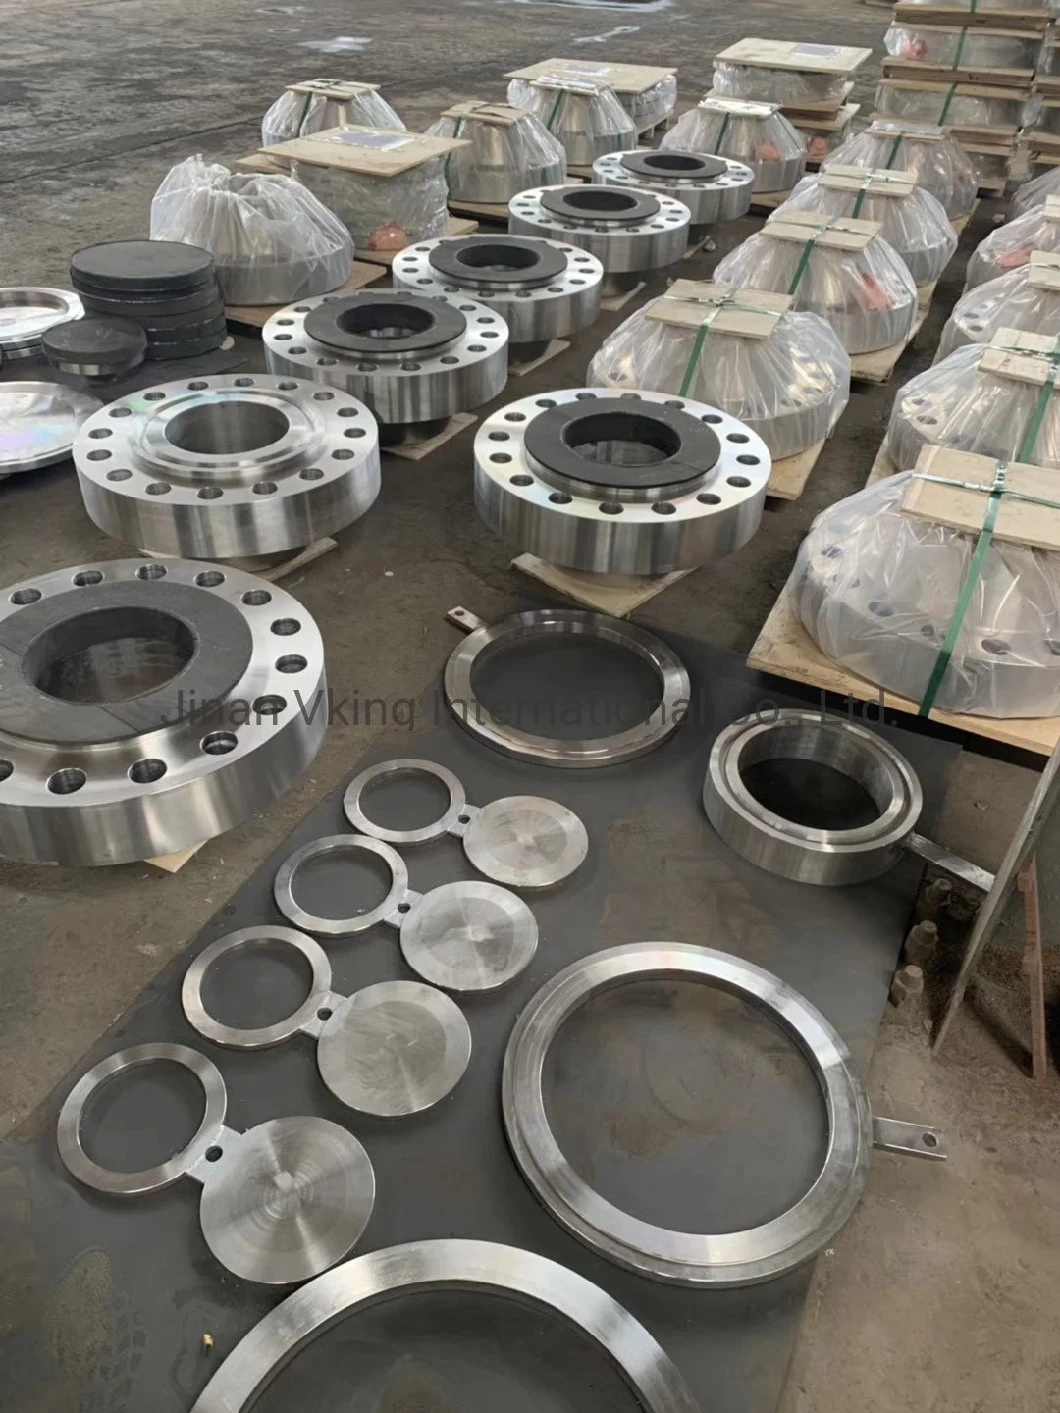 Pipe Fitting Stainless Steel/Carbon Steel A105 Forged/Flat/Slip-on/Orifice/ Lap Joint/Soket Weld/Blind /Butt Welding Neck Flanges